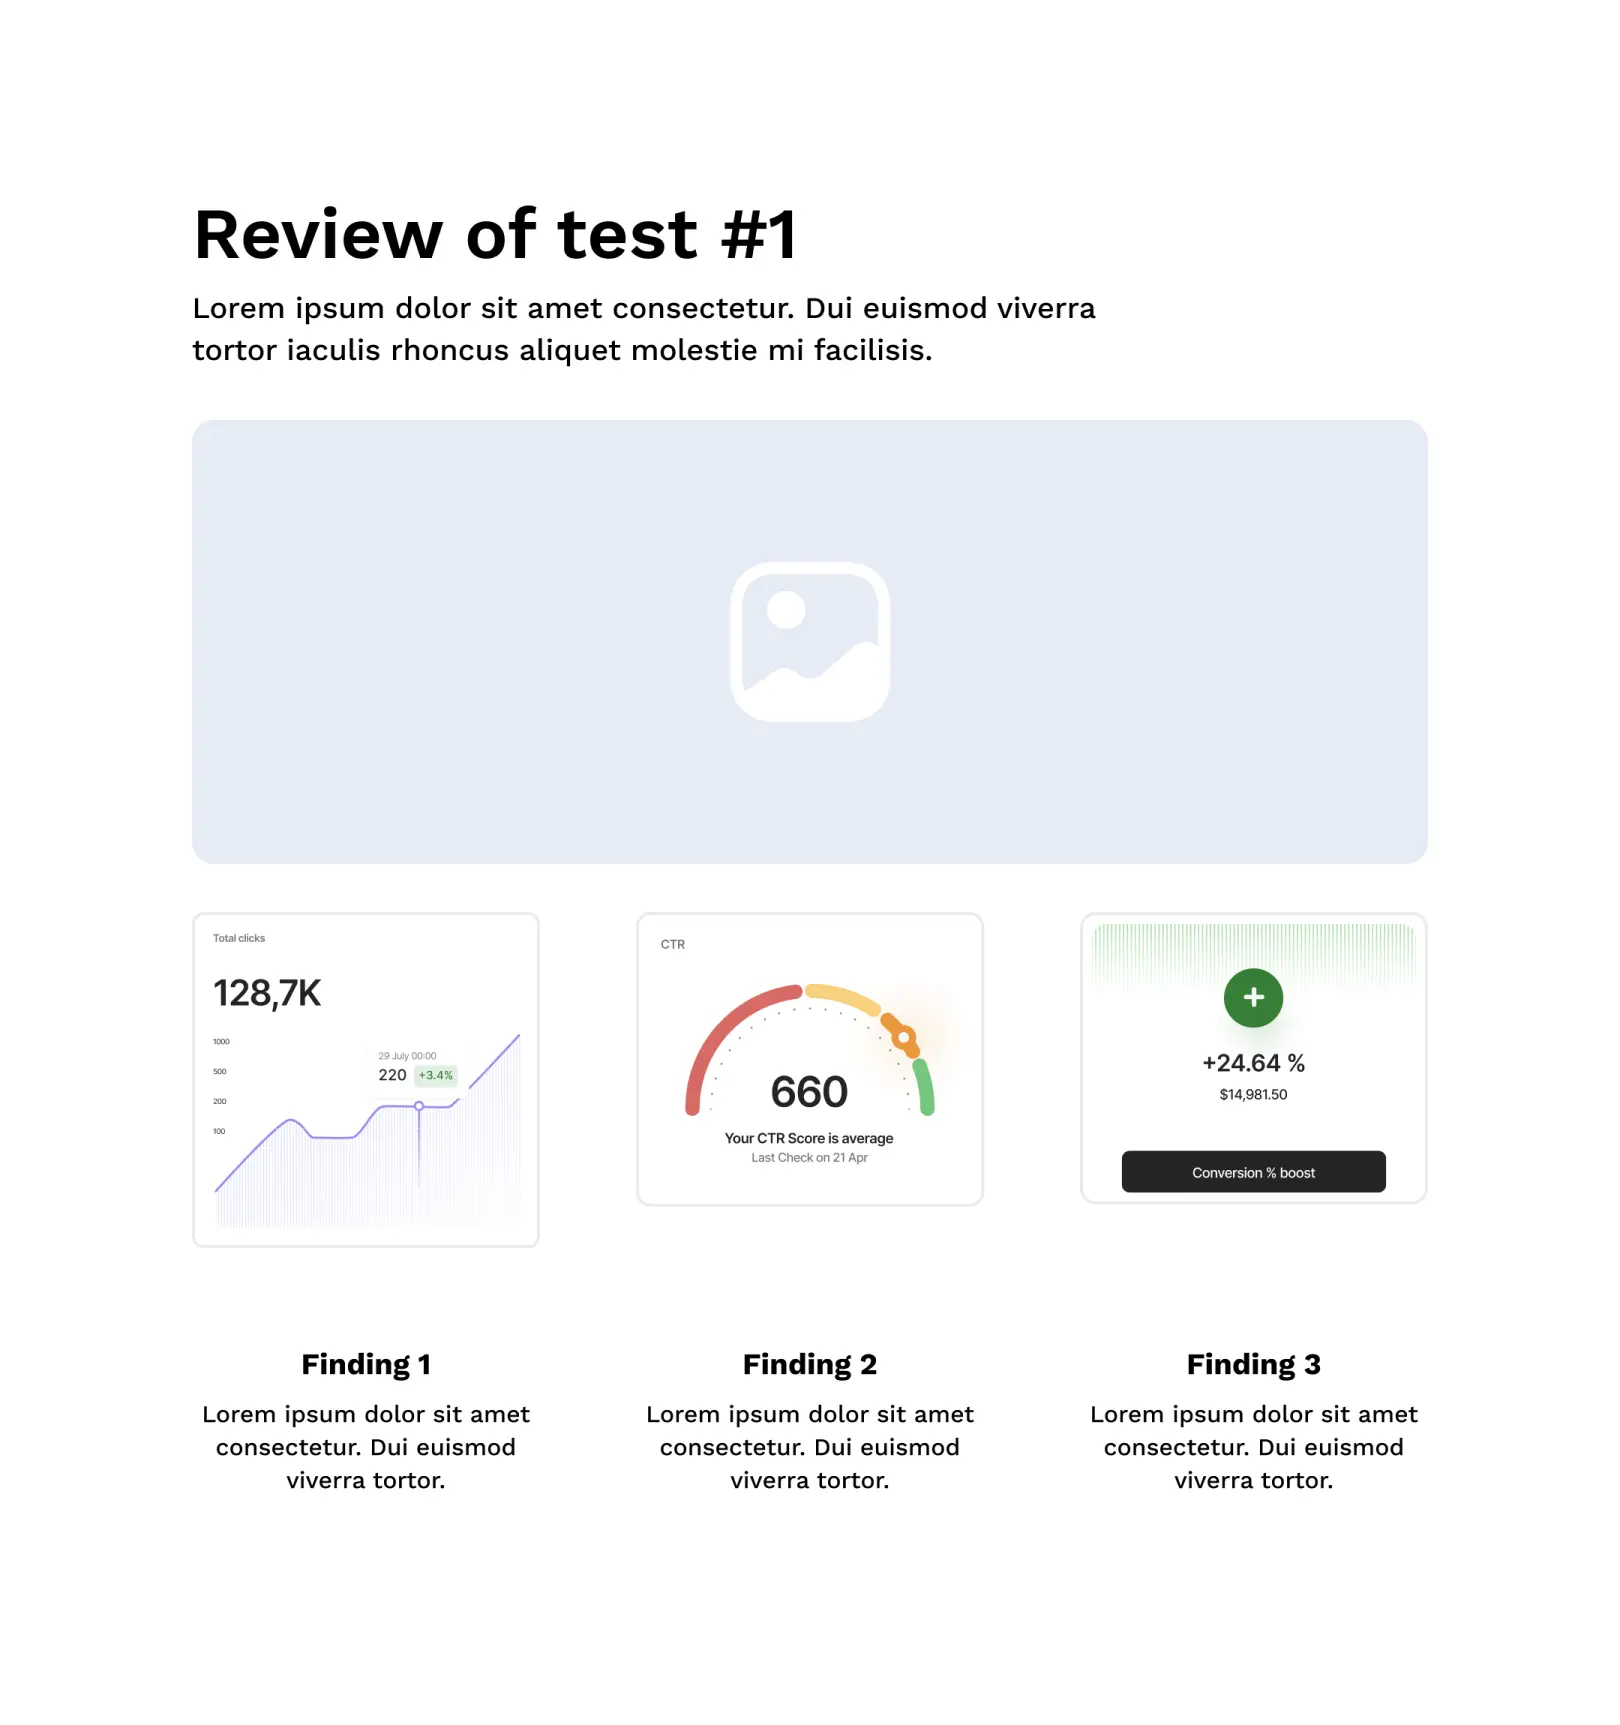 Review of test - conversion design